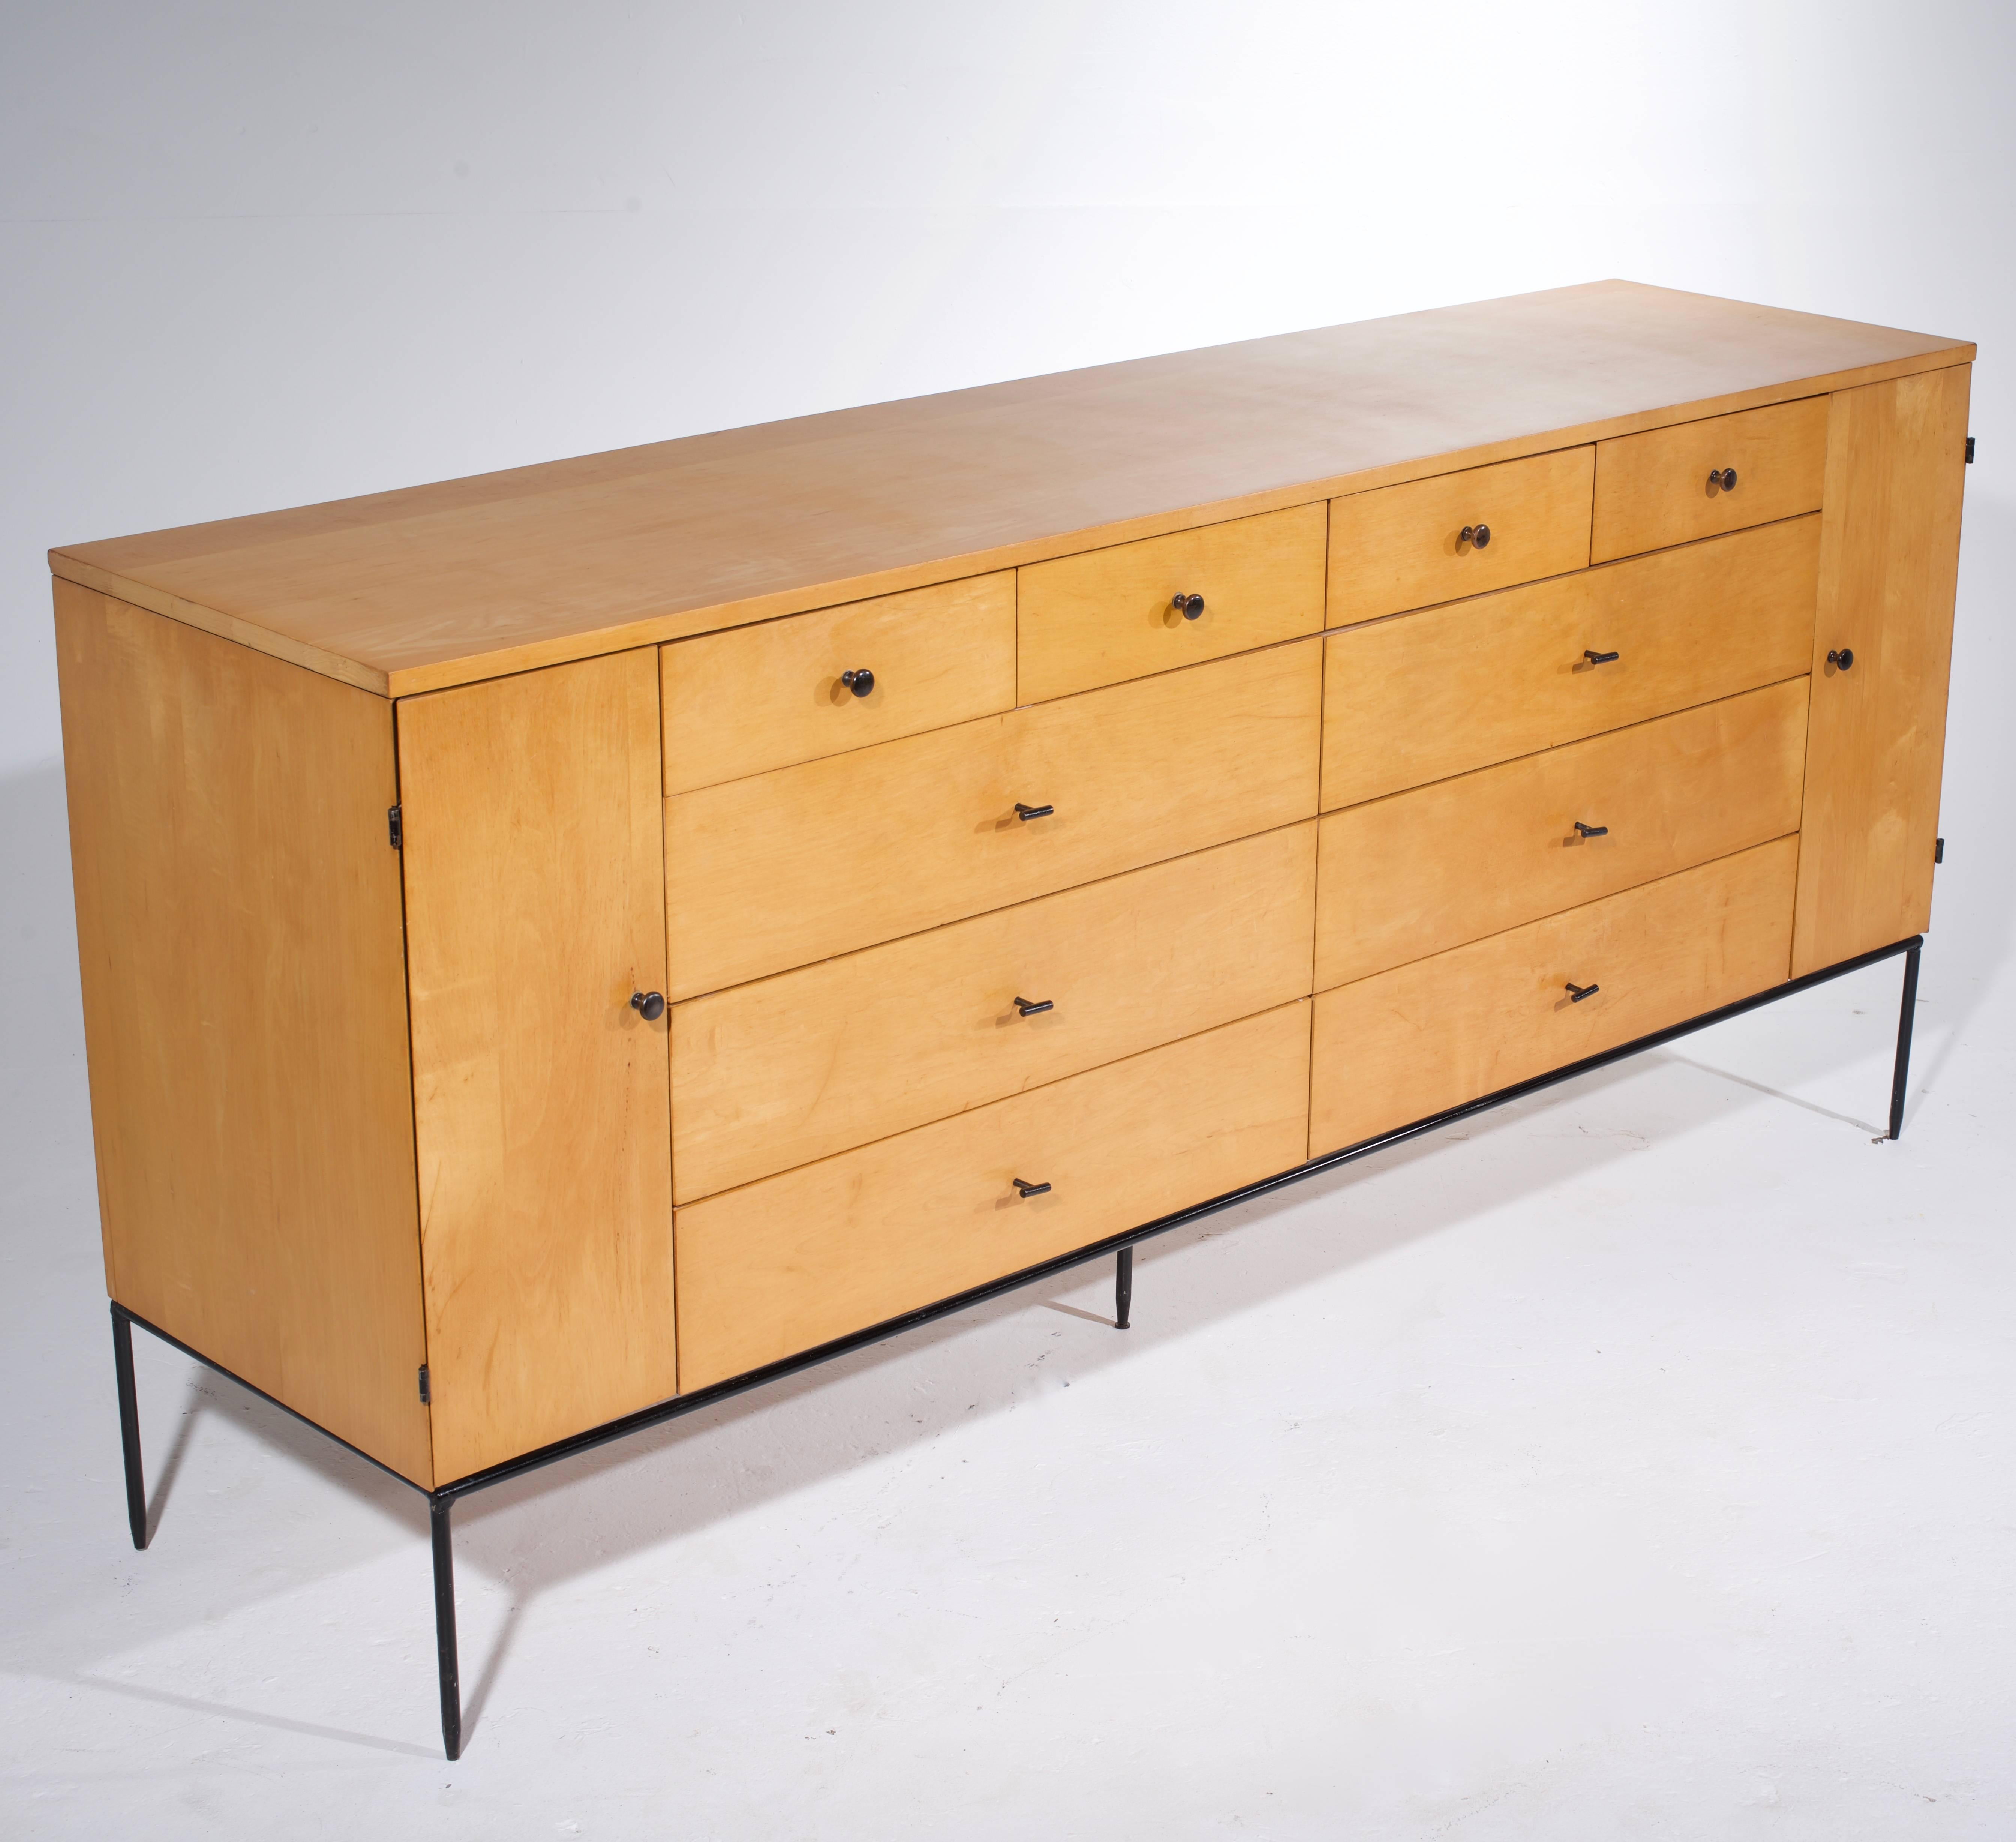 Extremely rare Paul McCobb 20-drawer dresser for Planner Group. This dresser is shown with a natural finish over solid maple cabinetry. Sold separately and shown is the even more rare vanity.